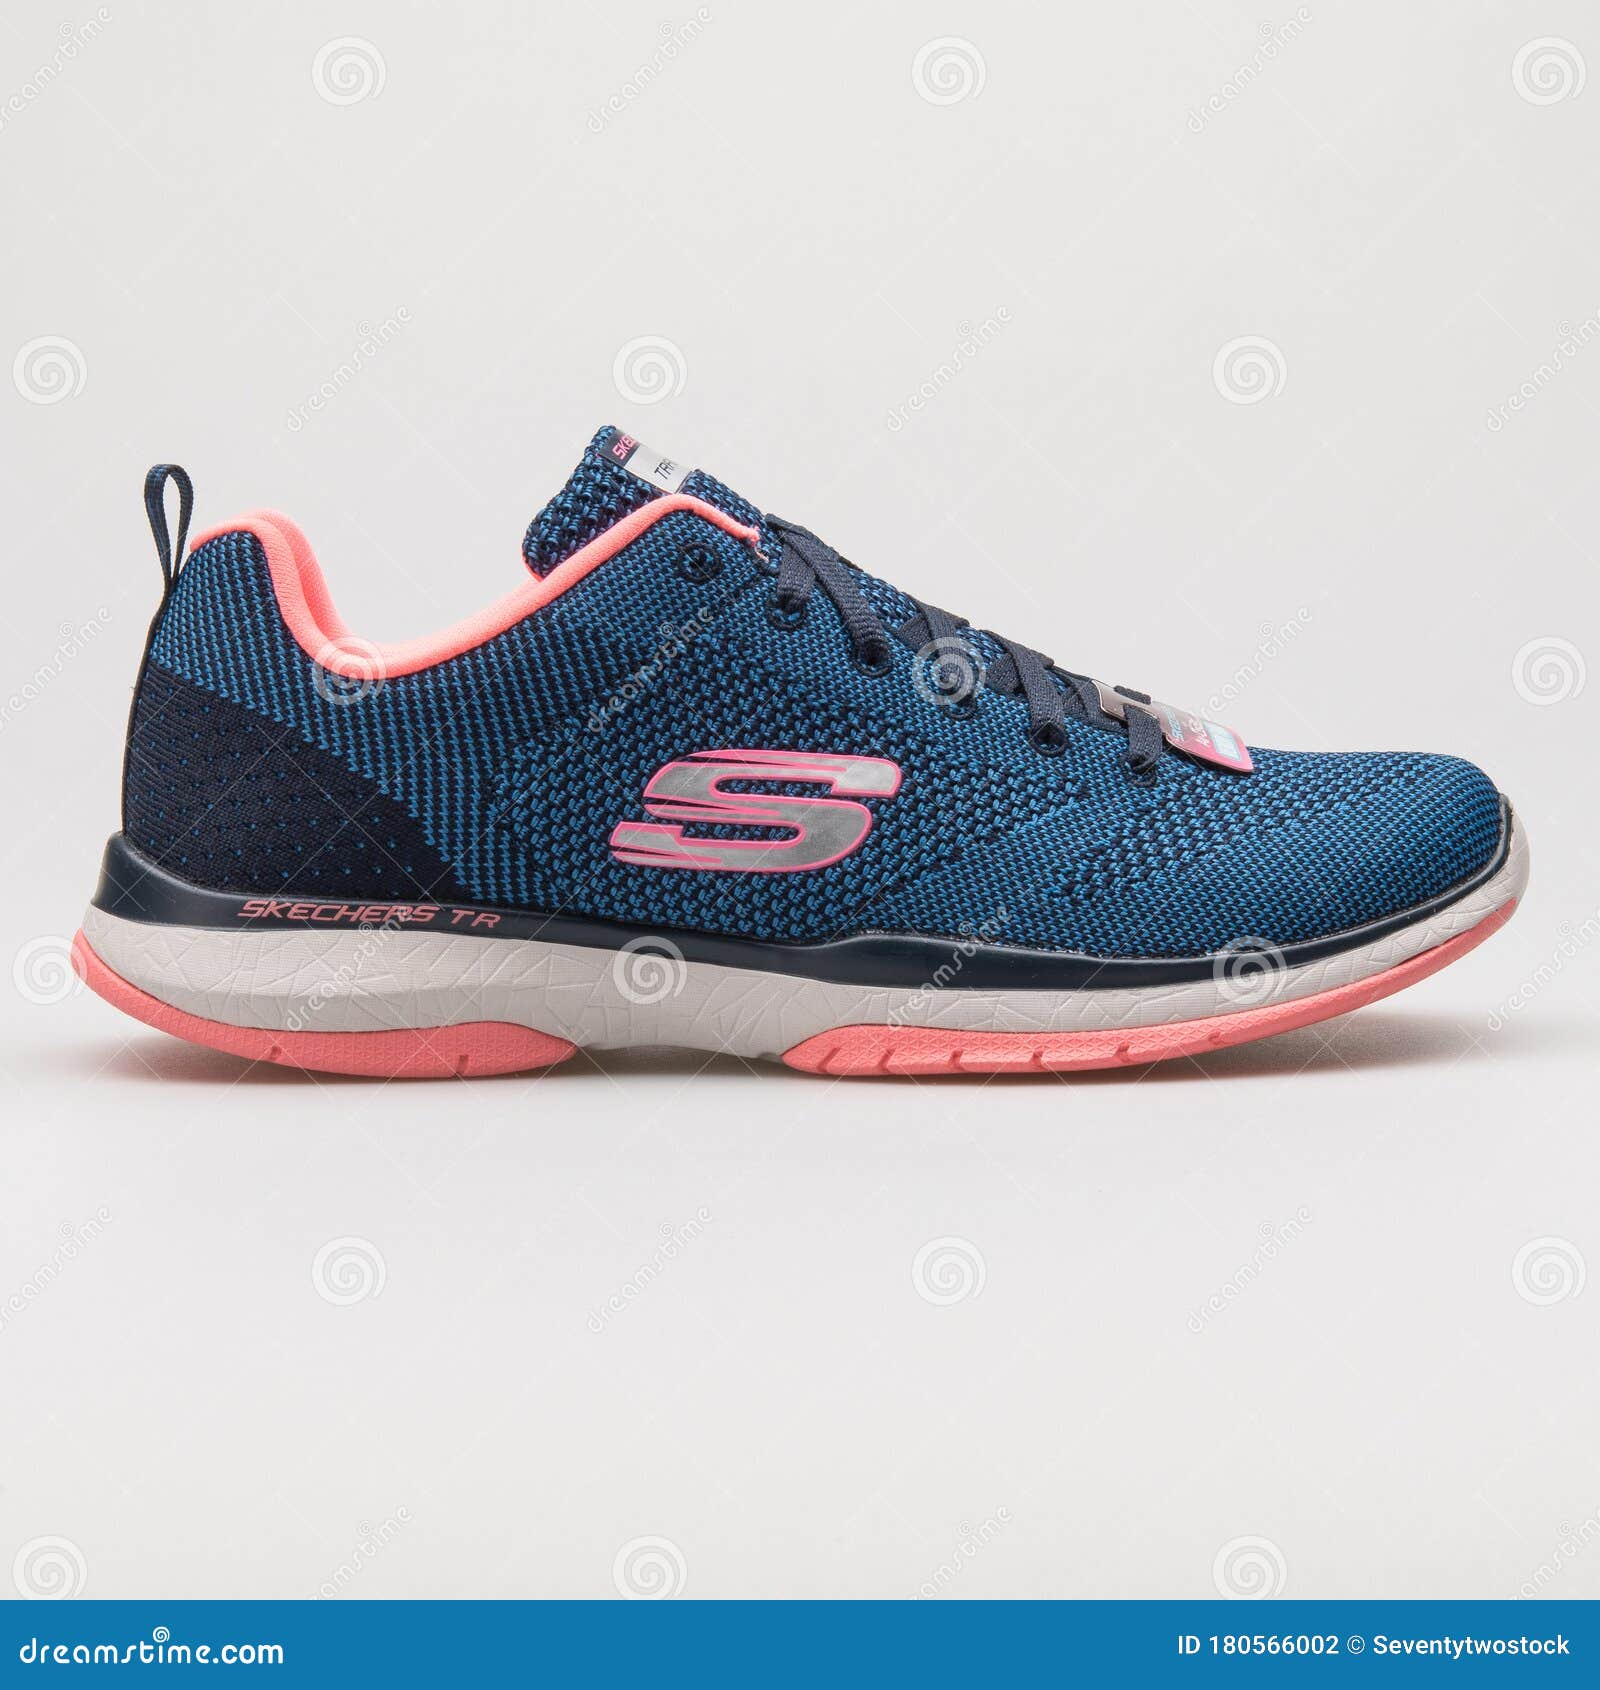 Skechers Burst TR Close Knit Navy Blue and Pink Sneaker Editorial Photography - Image of activity: 180566002